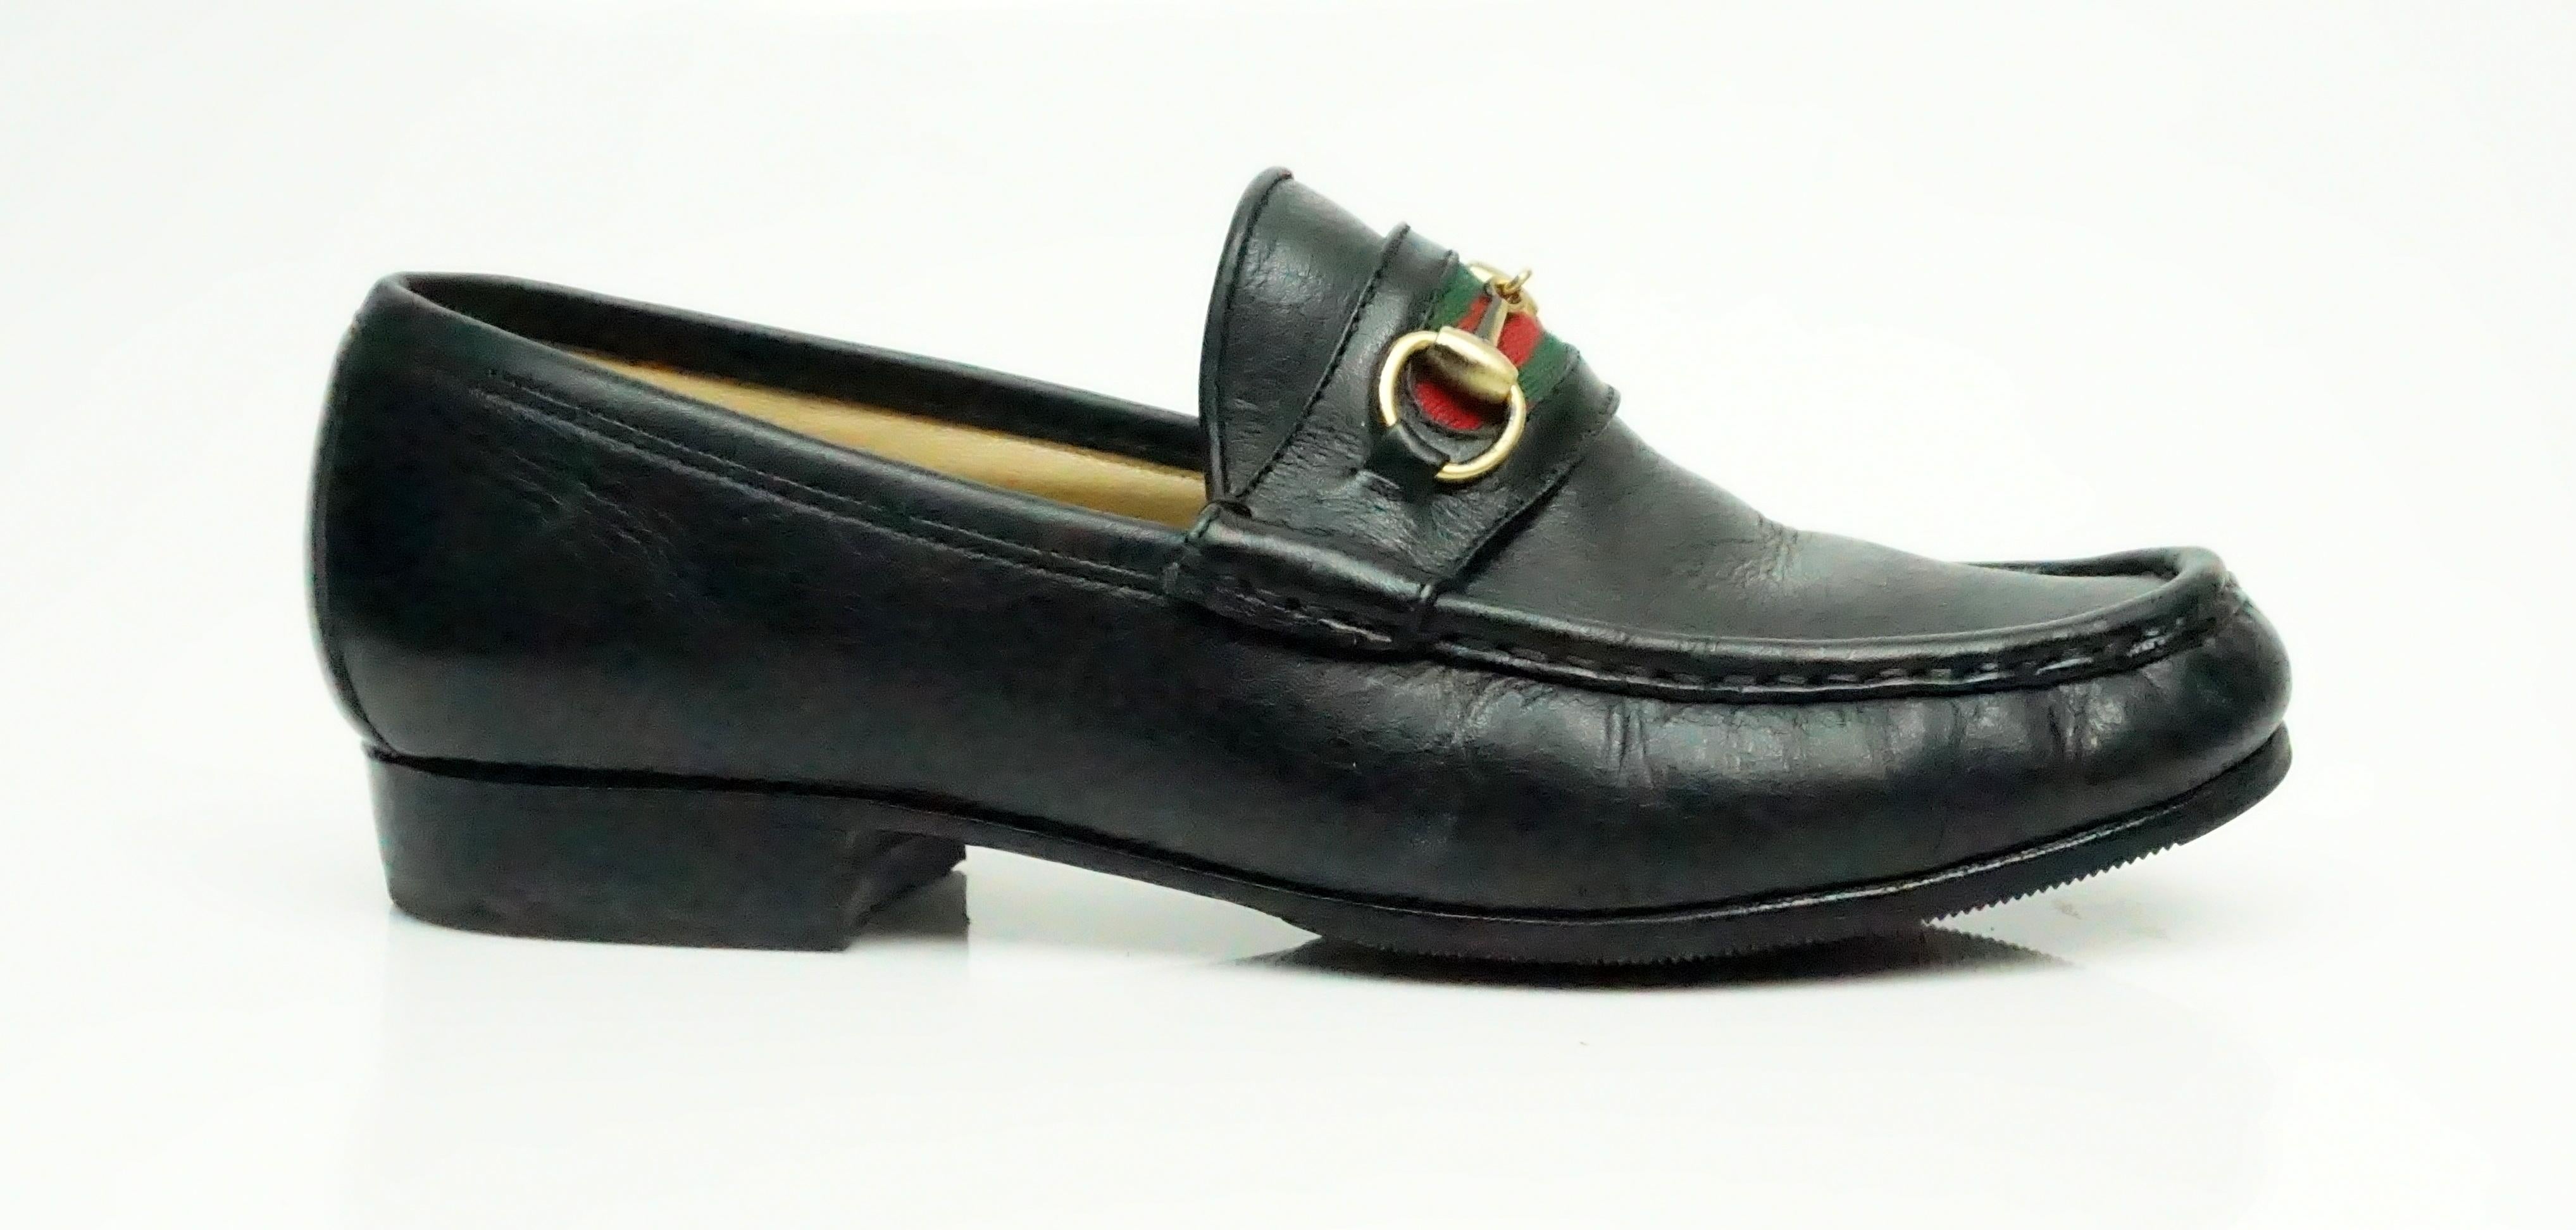 Gucci VIntage Black Leather Loafer w/ Red and Green Stripe - 6 This vintage Gucci leather loafer is in excellent condition. The shoe has very little wear. The shoe has the classic Gucci red and green stripe on the front of the shoe with a gold